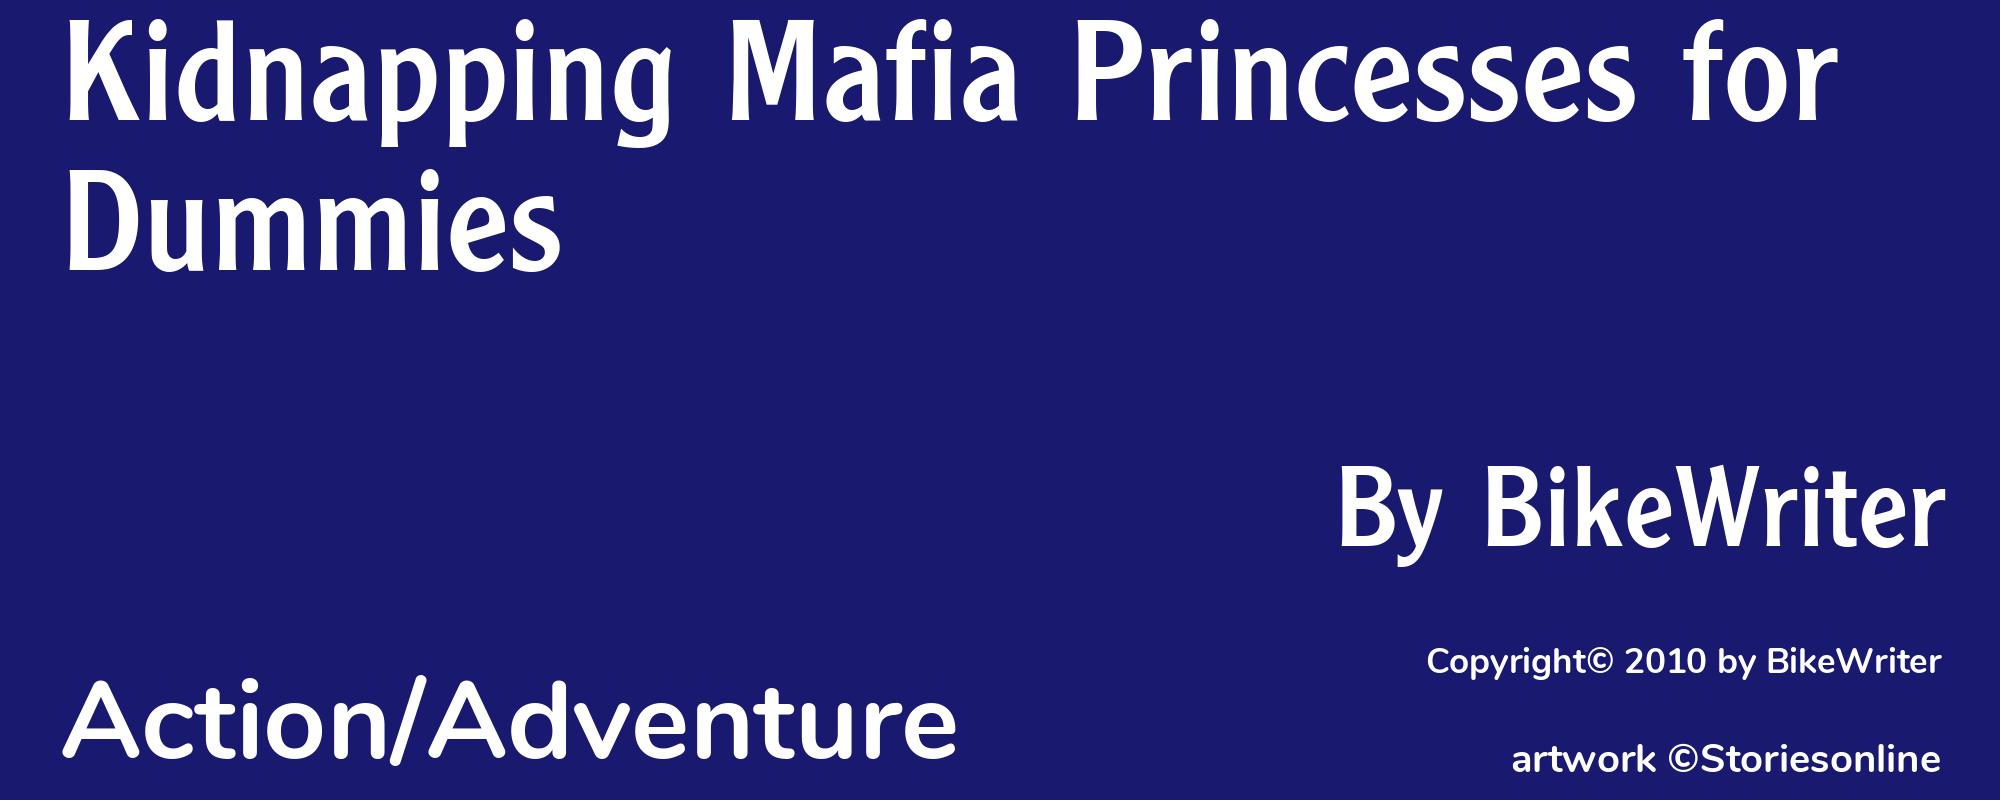 Kidnapping Mafia Princesses for Dummies - Cover